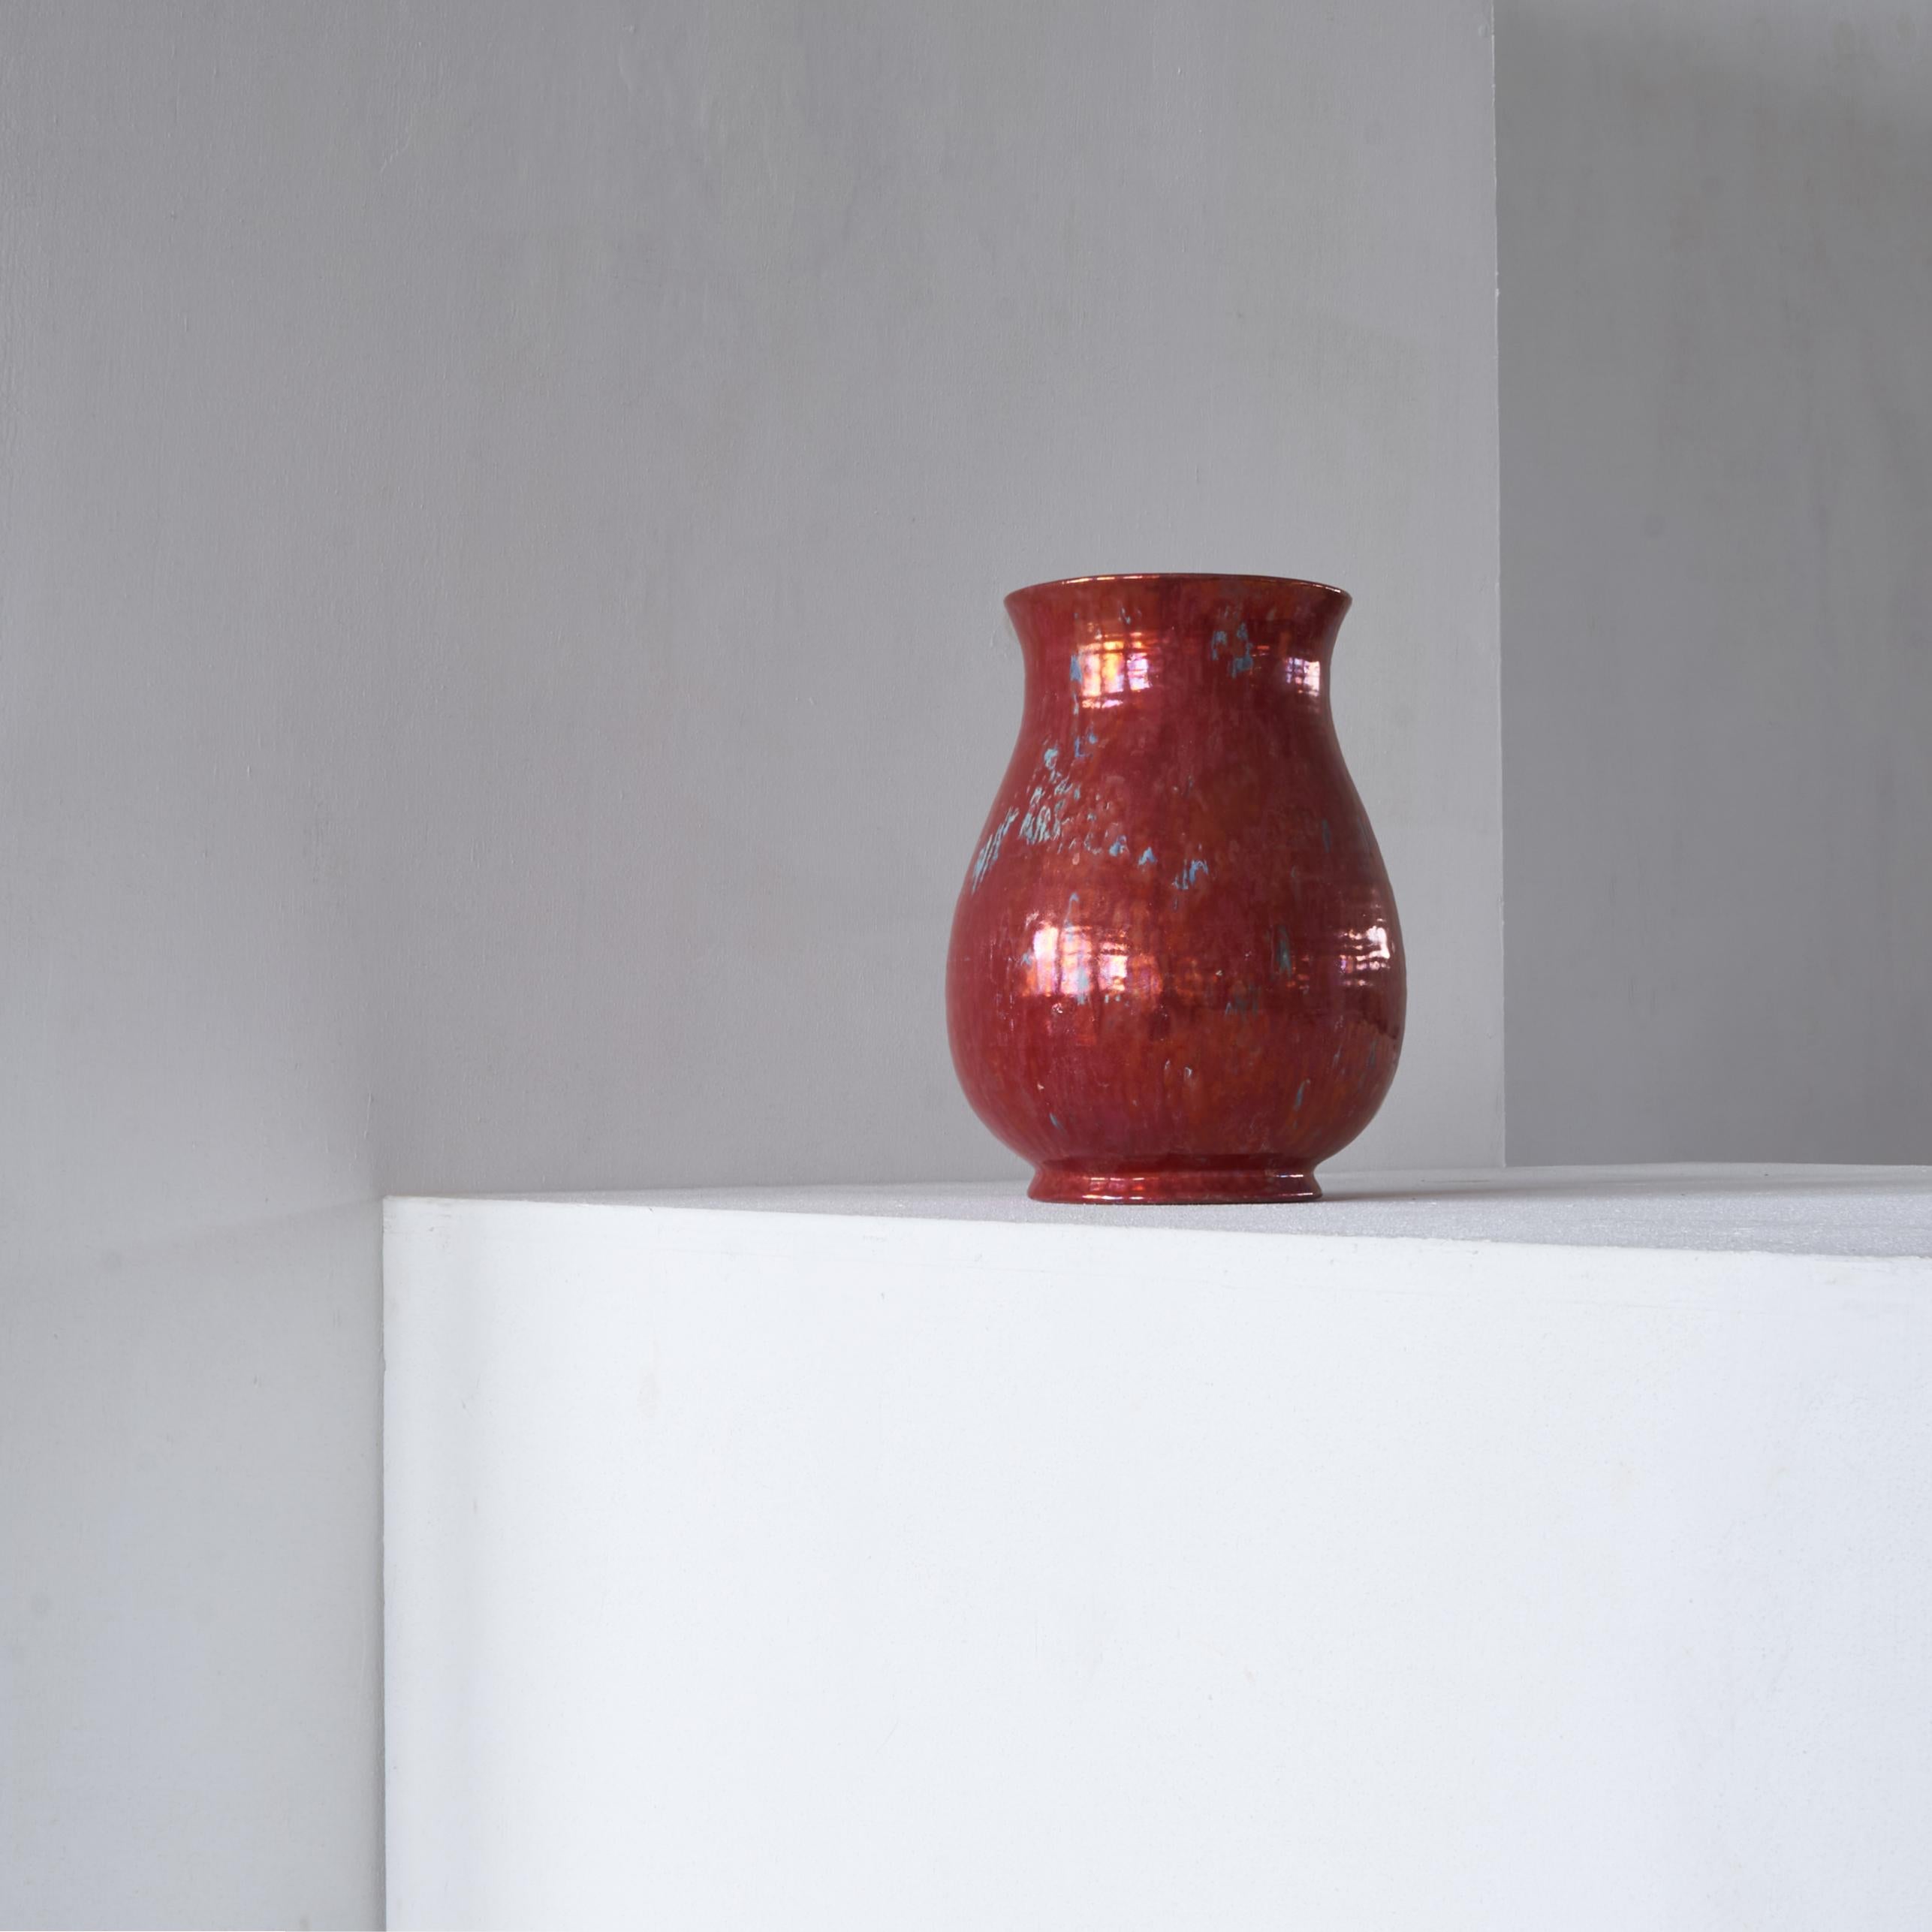 Very large vase in red ‘Reflet Metallique’ by ‘De Porceleyne Fles’ Delft, around 1900.

Due to the metallic glazing this vase looks incredibly modern for it's age. The height and shape also add to this modern aesthetic. Therefore this vase will